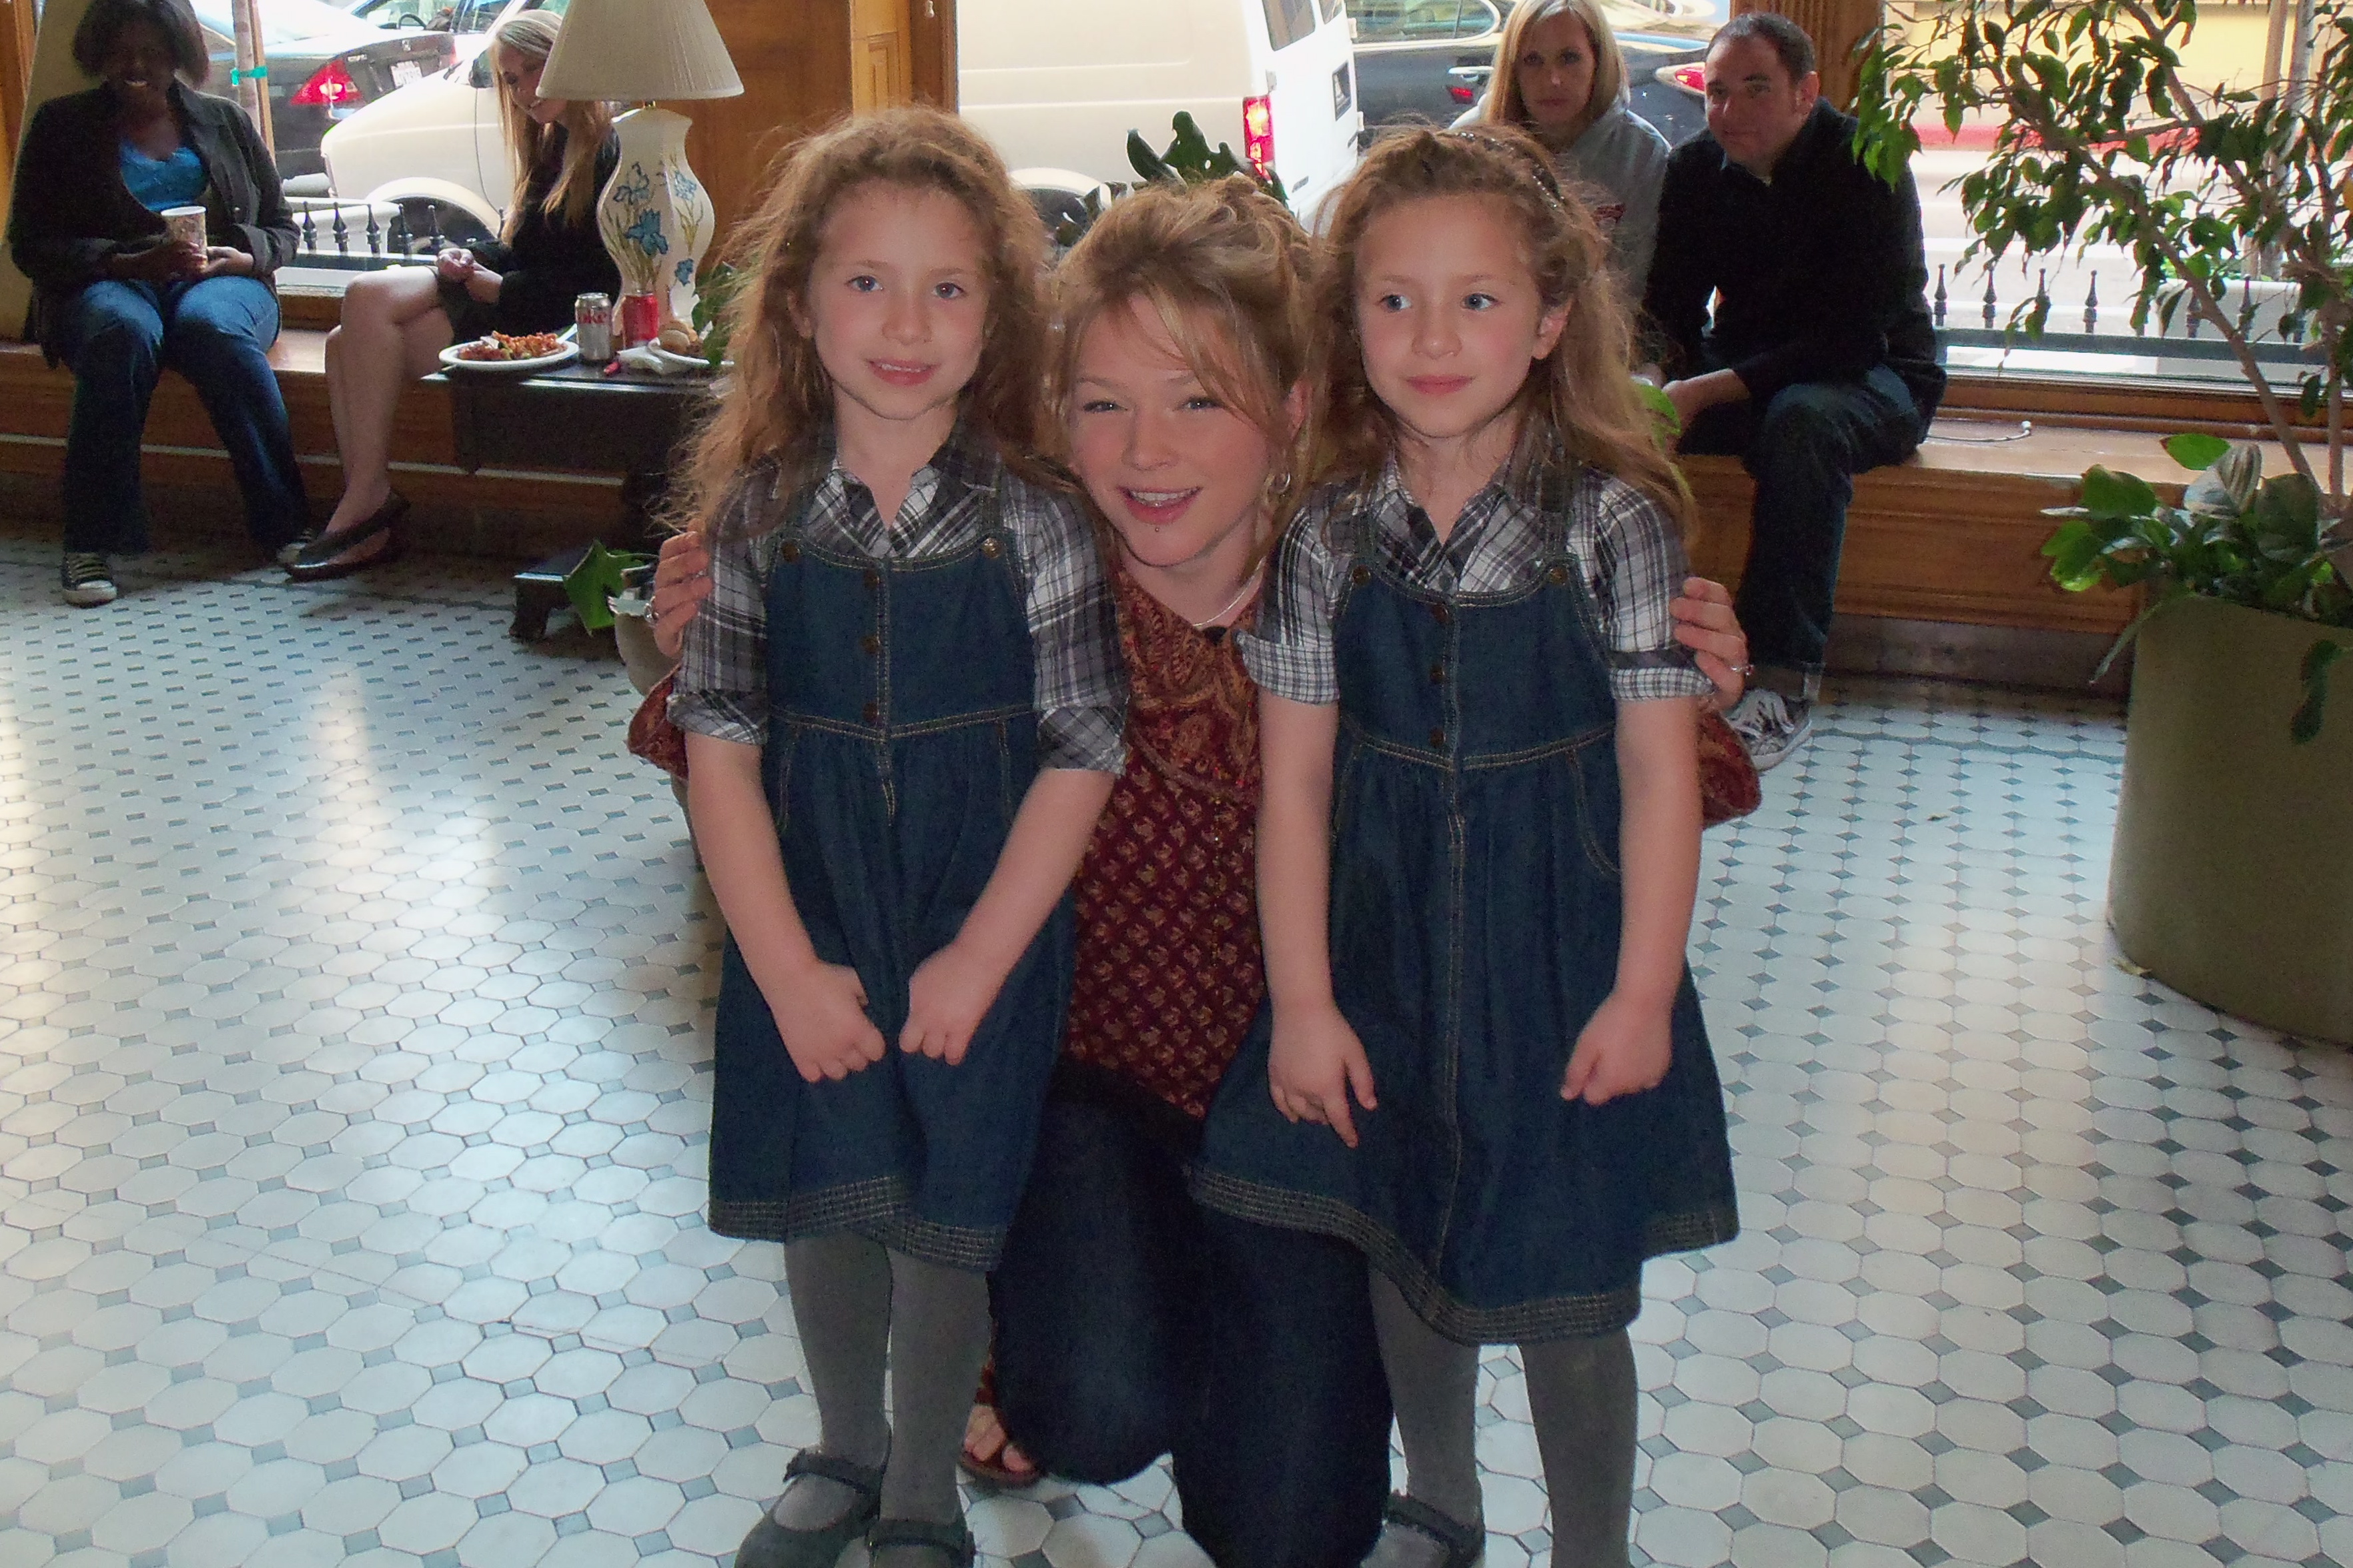 Bianca & Chiara with Crystal Bowersox on her music video nov 22 2010